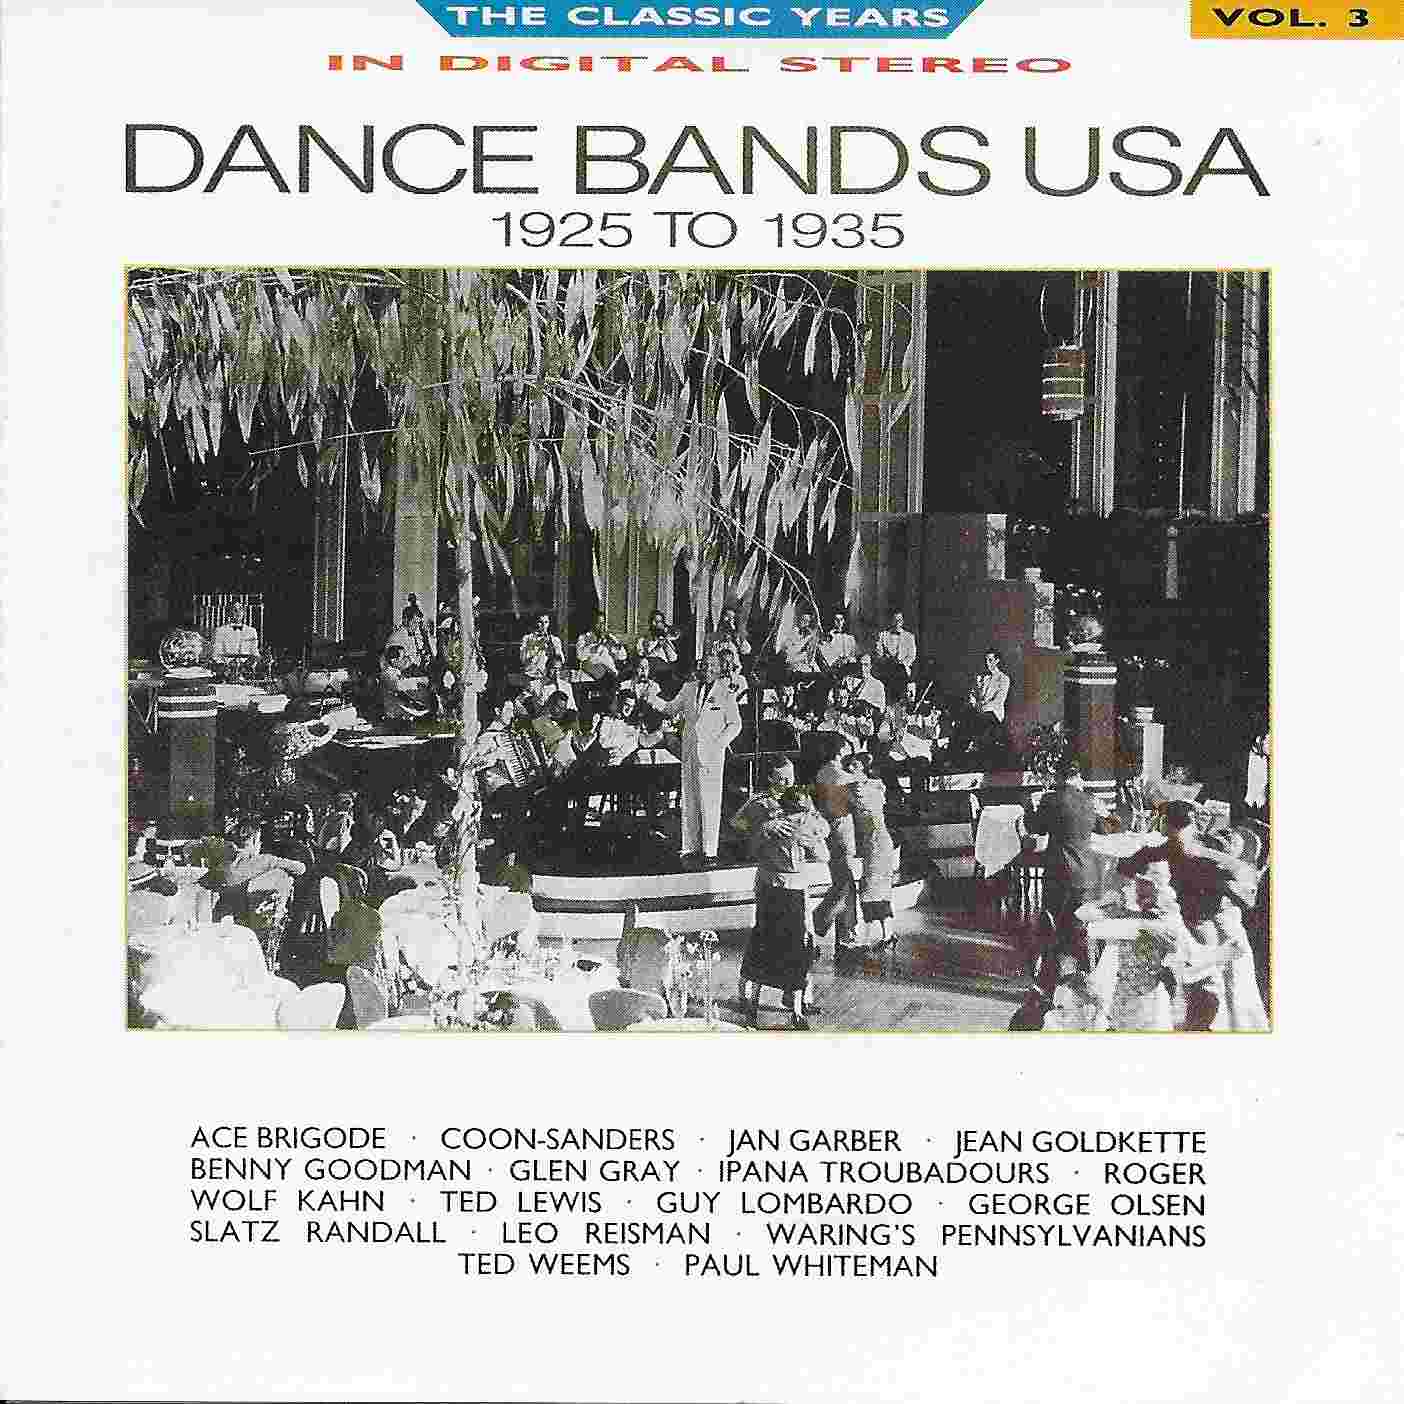 Picture of BBCCD650 Classic years - Volume 3, Dance bands USA by artist Various from the BBC cds - Records and Tapes library